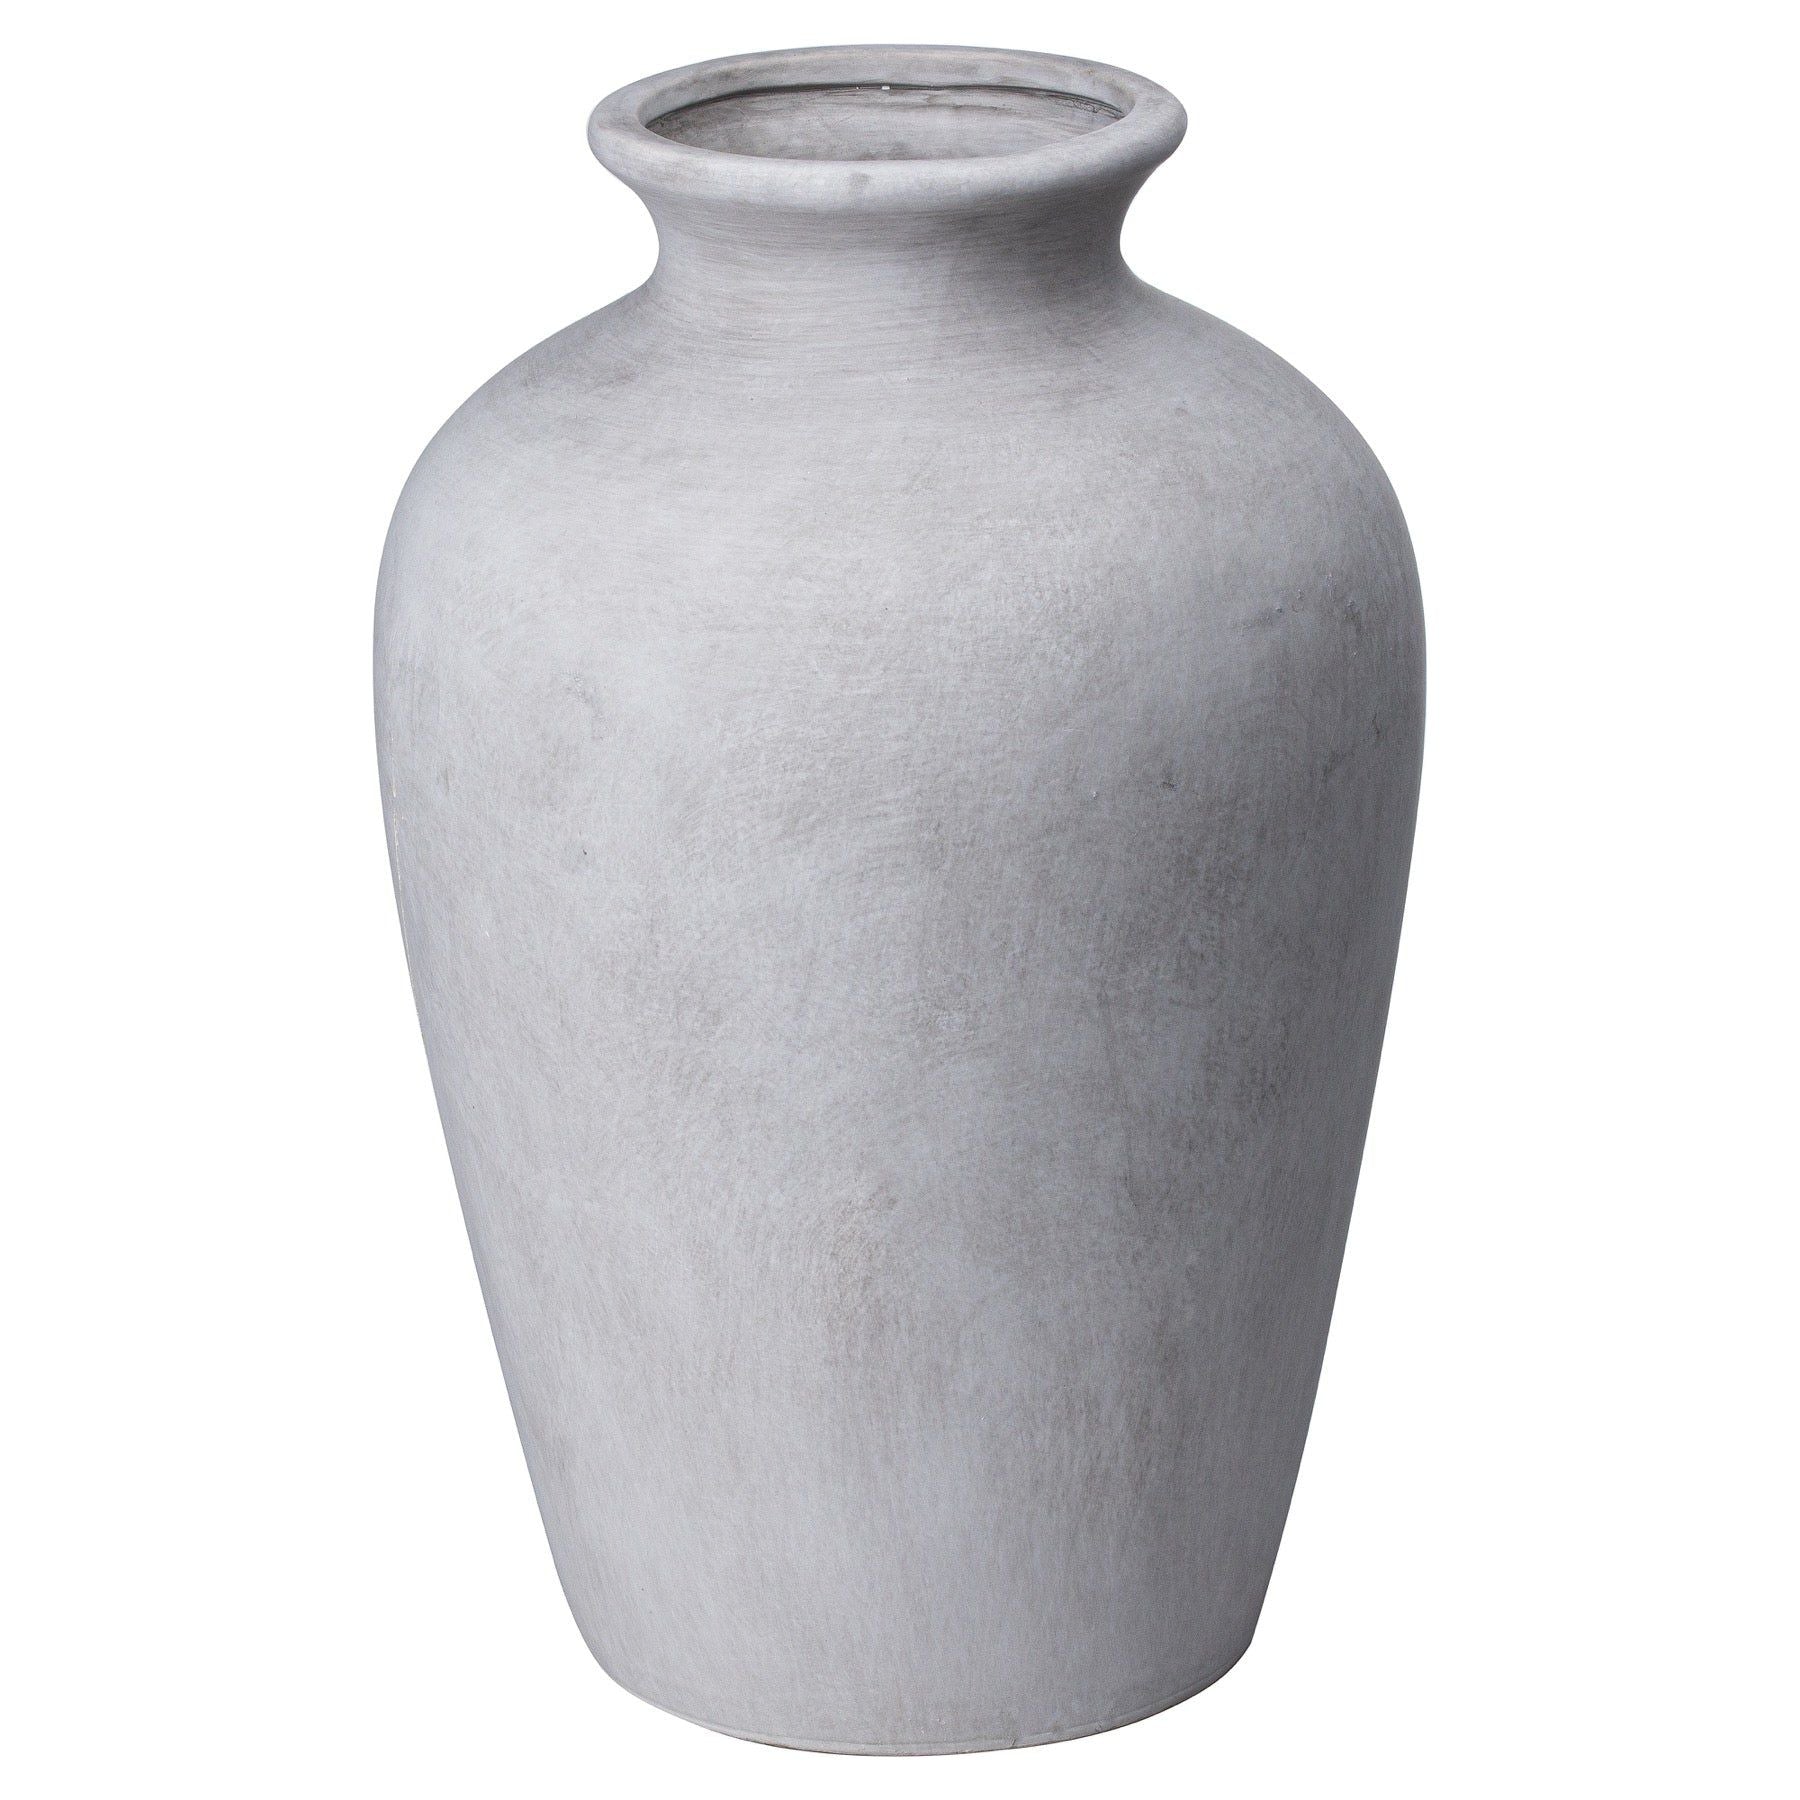 Darcy Chours Stone Vase - Ashton and Finch